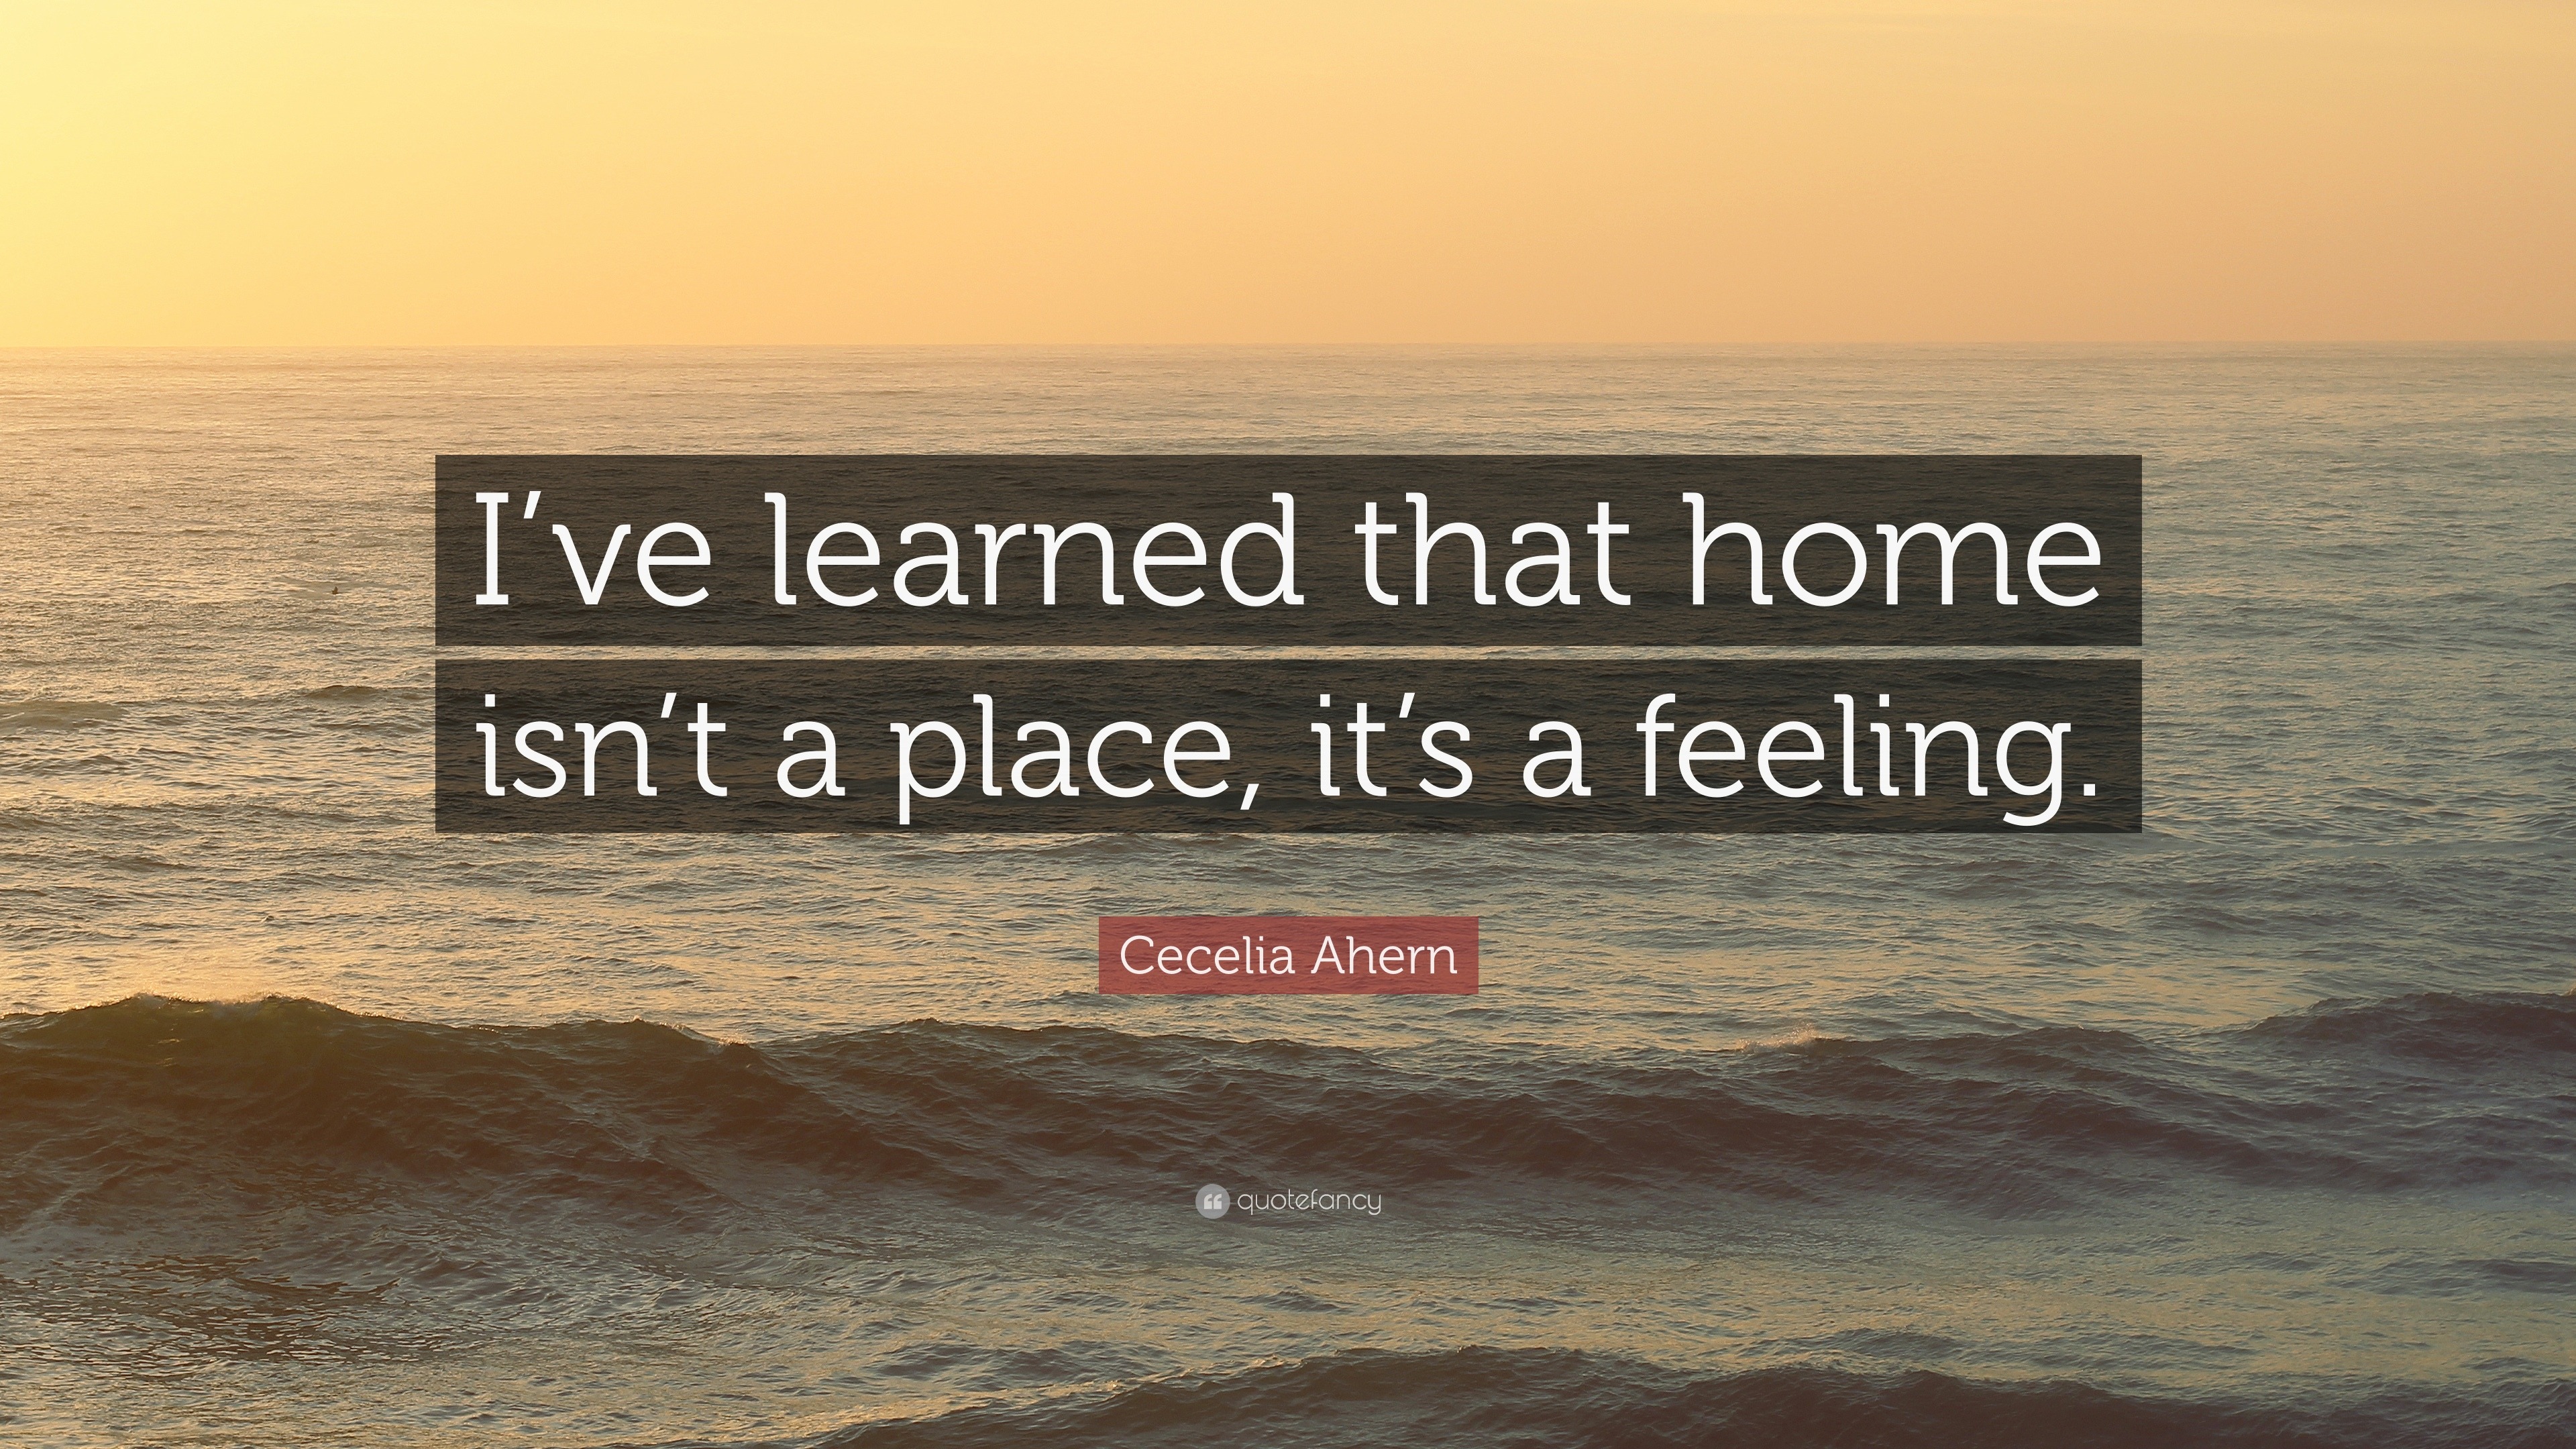 Cecelia Ahern Quote: “I've learned that home isn't a place, it's a ...